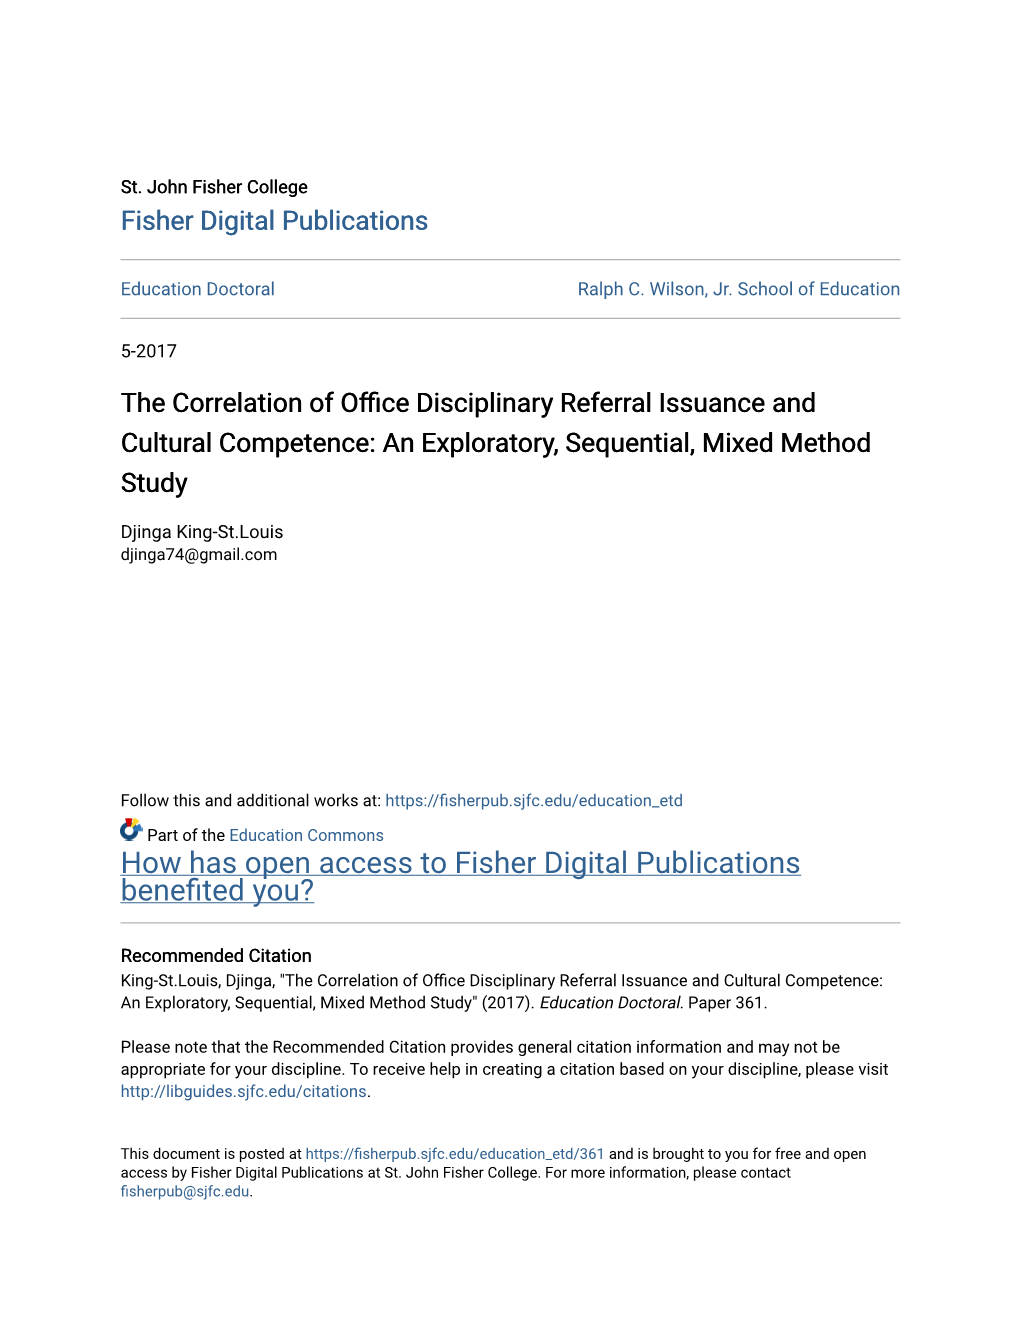 The Correlation of Office Disciplinary Referral Issuance and Cultural Competence: an Exploratory, Sequential, Mixed Method Study